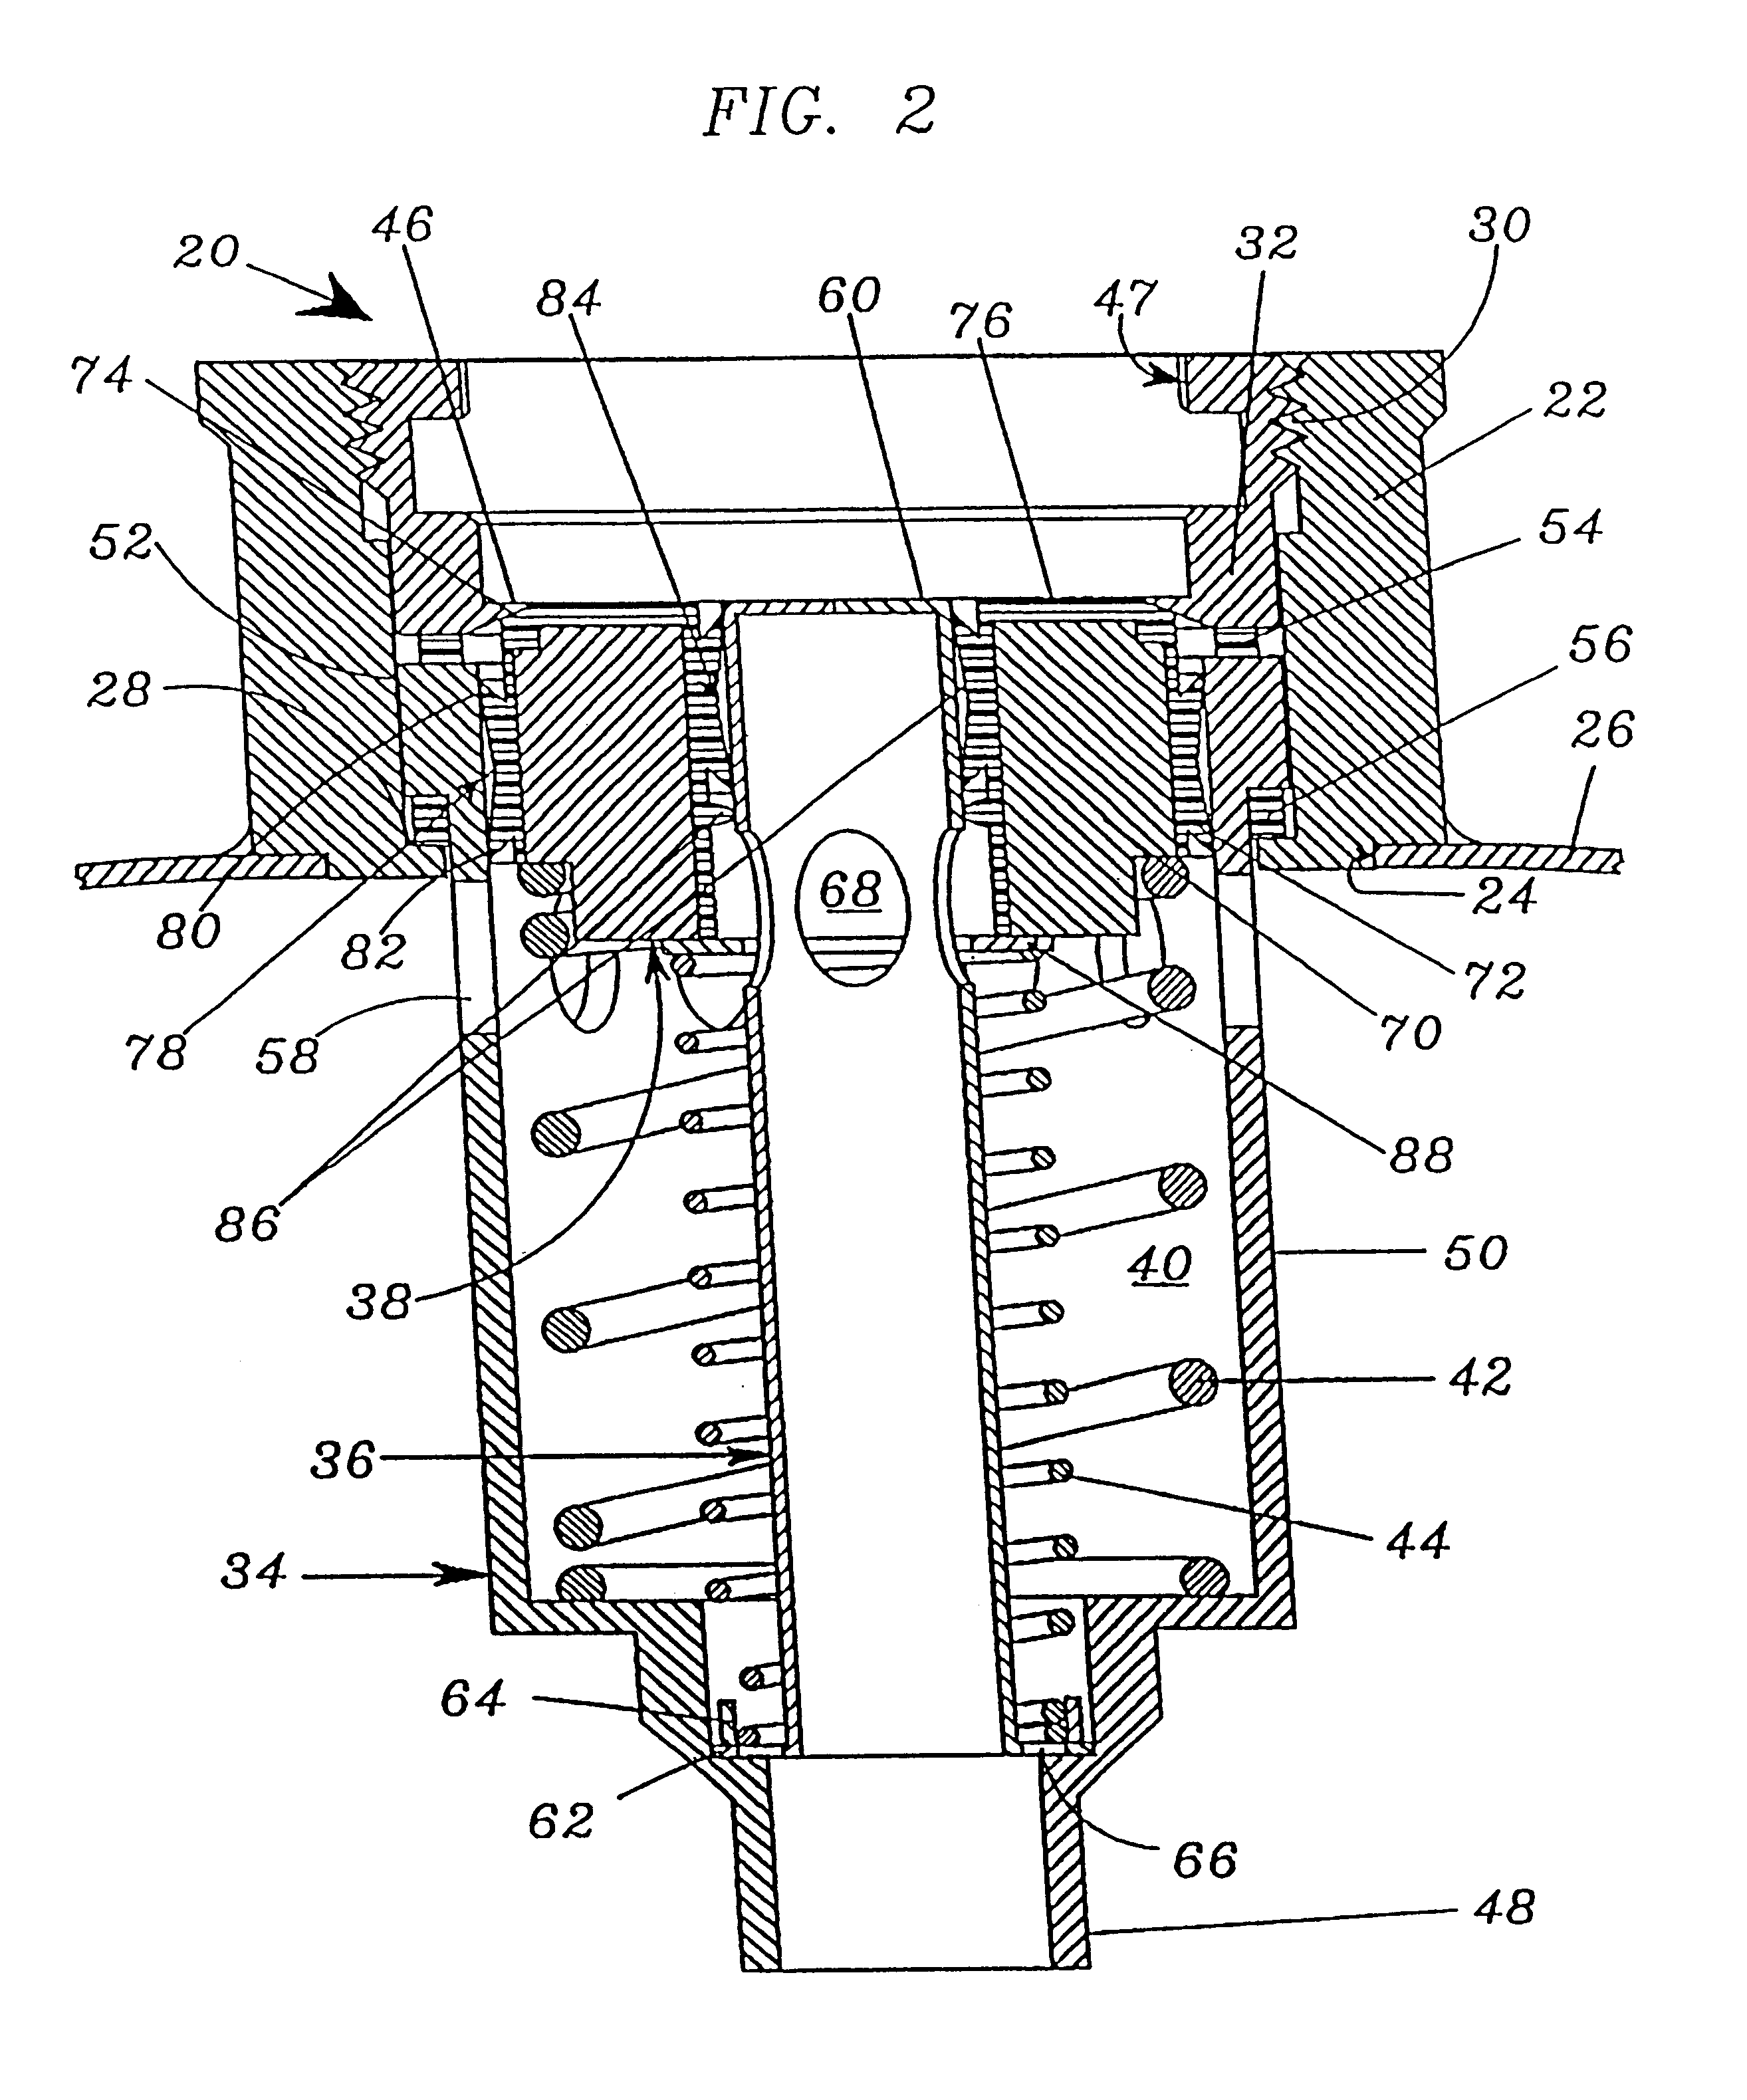 Valve assembly for controlling fluid ingress and egress from a transportable container which stores and distributes liquid under pressure